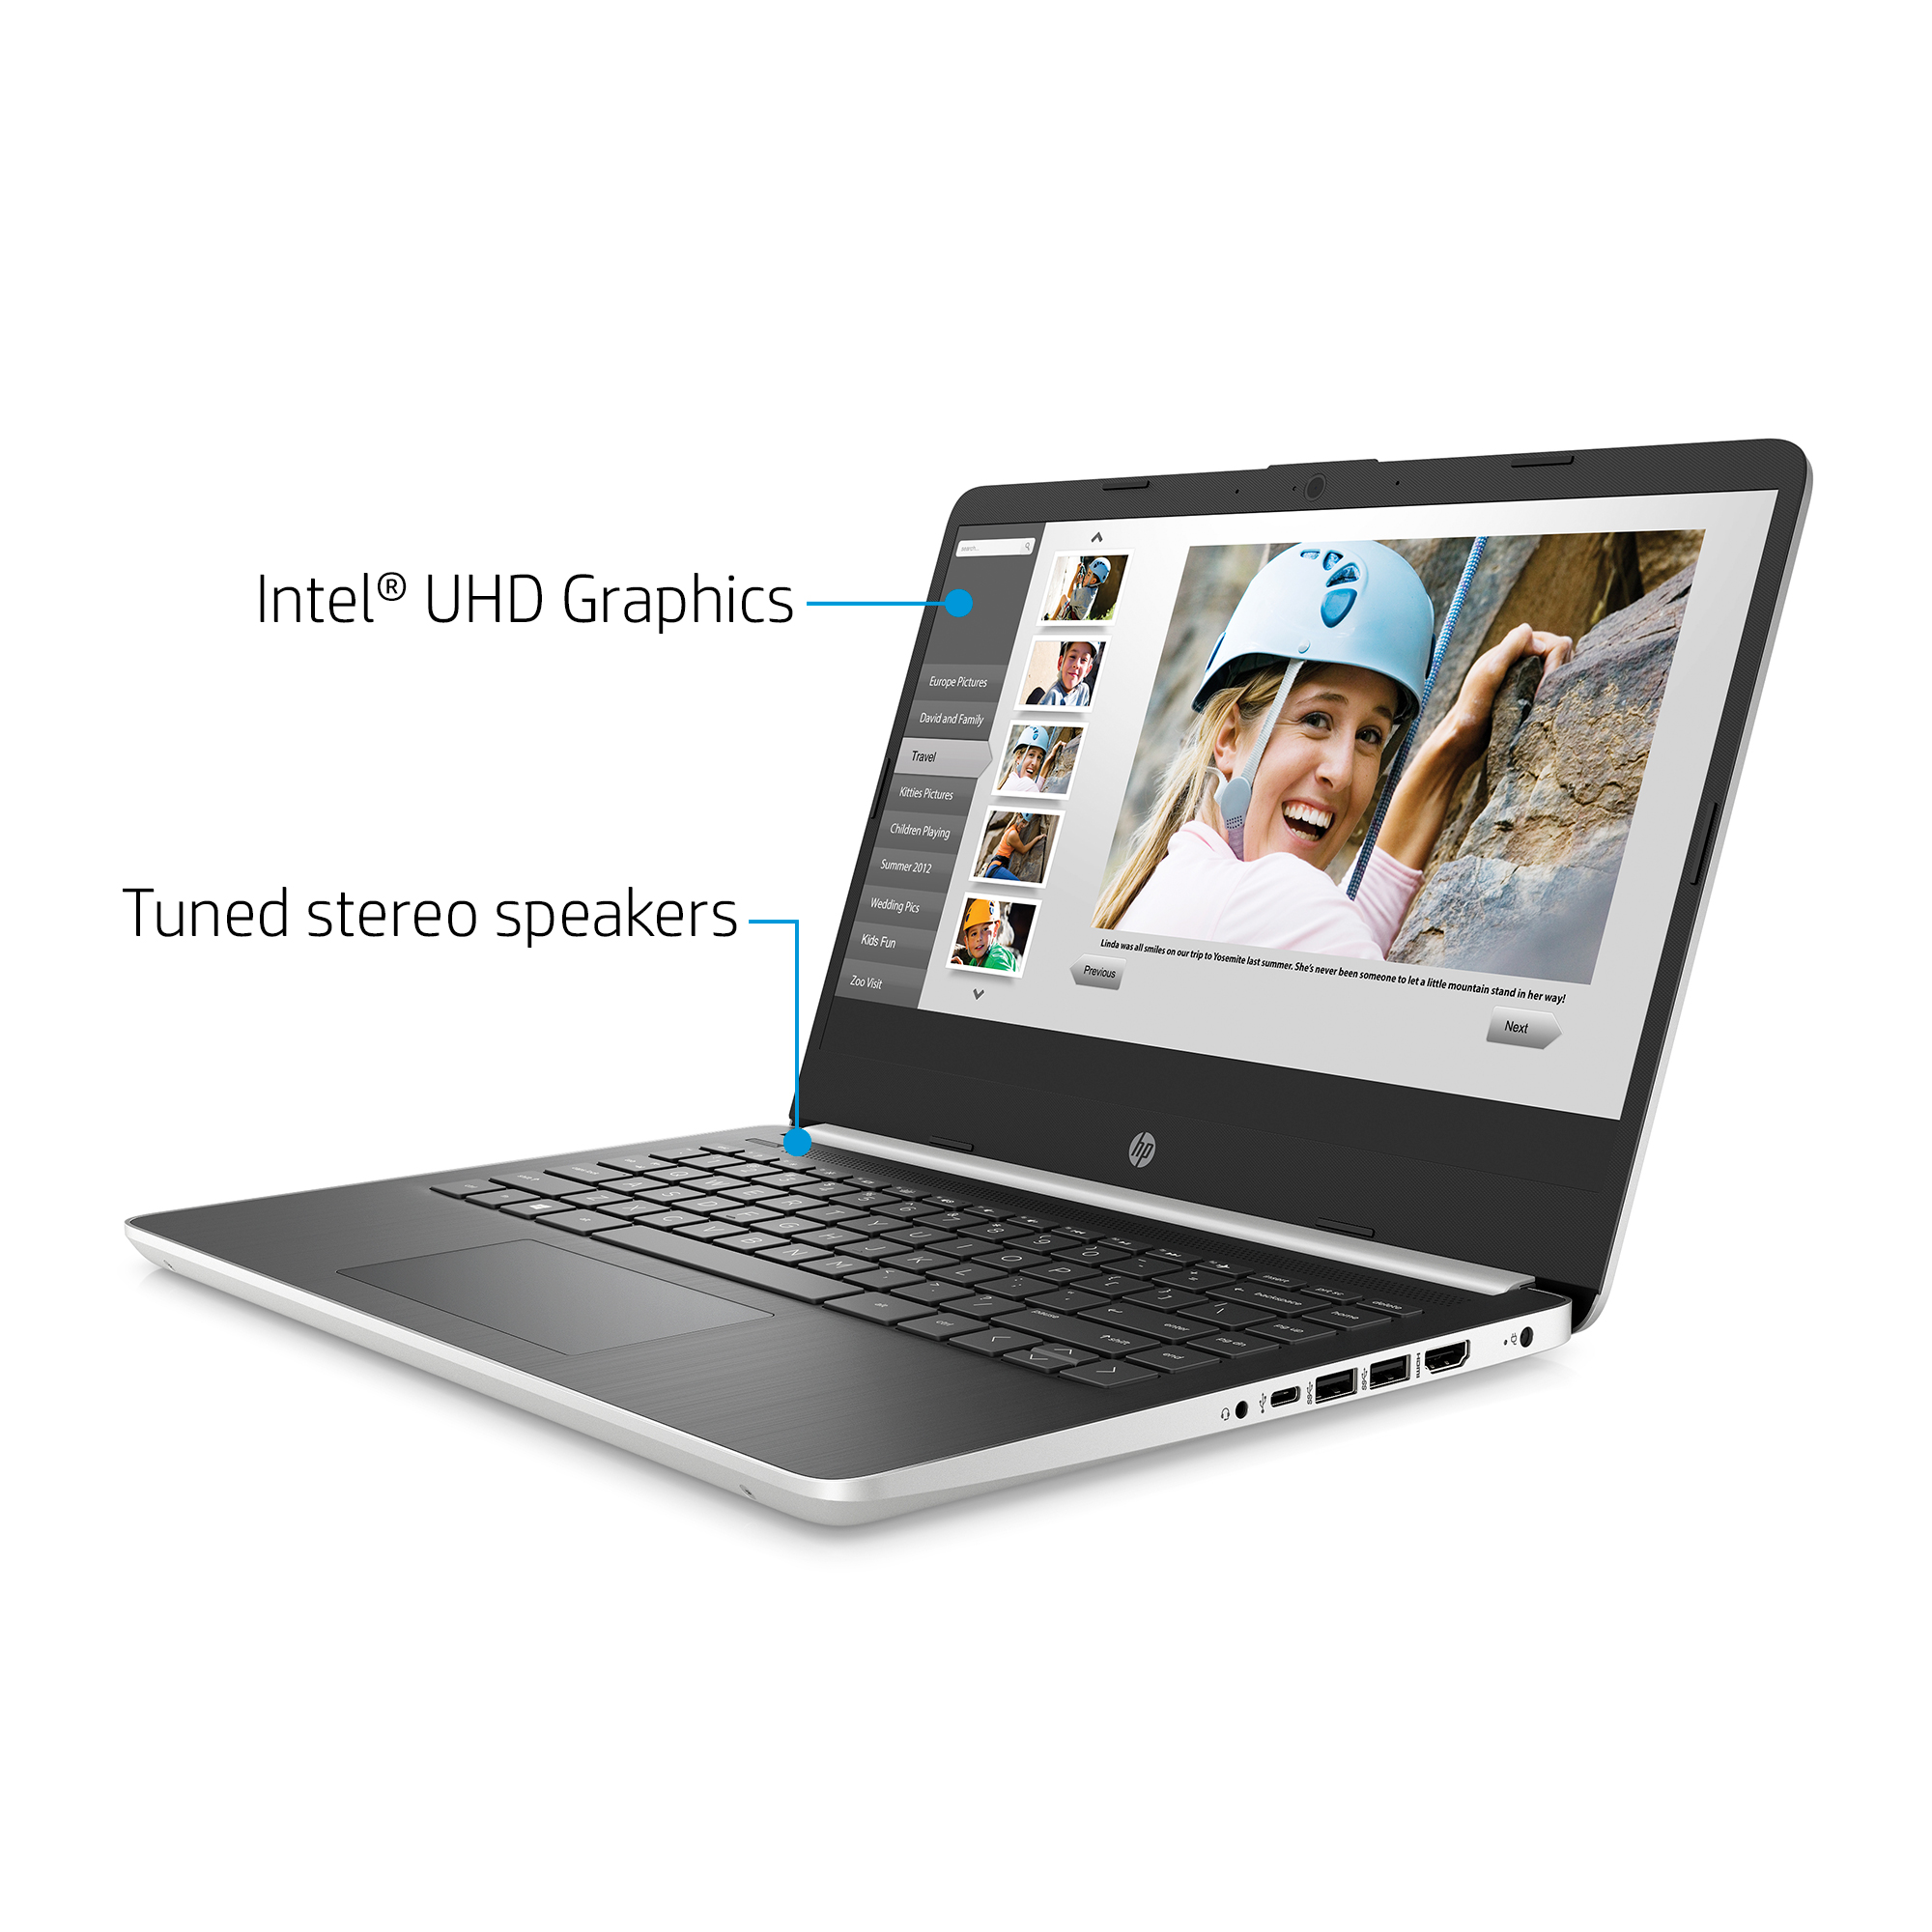 HP 14" Laptop, Intel Core i3-1005G1, 4 GB SDRAM, 128 GB M.2 Solid State Drive, Natural Silver, 14-DQ1037wm - image 4 of 9